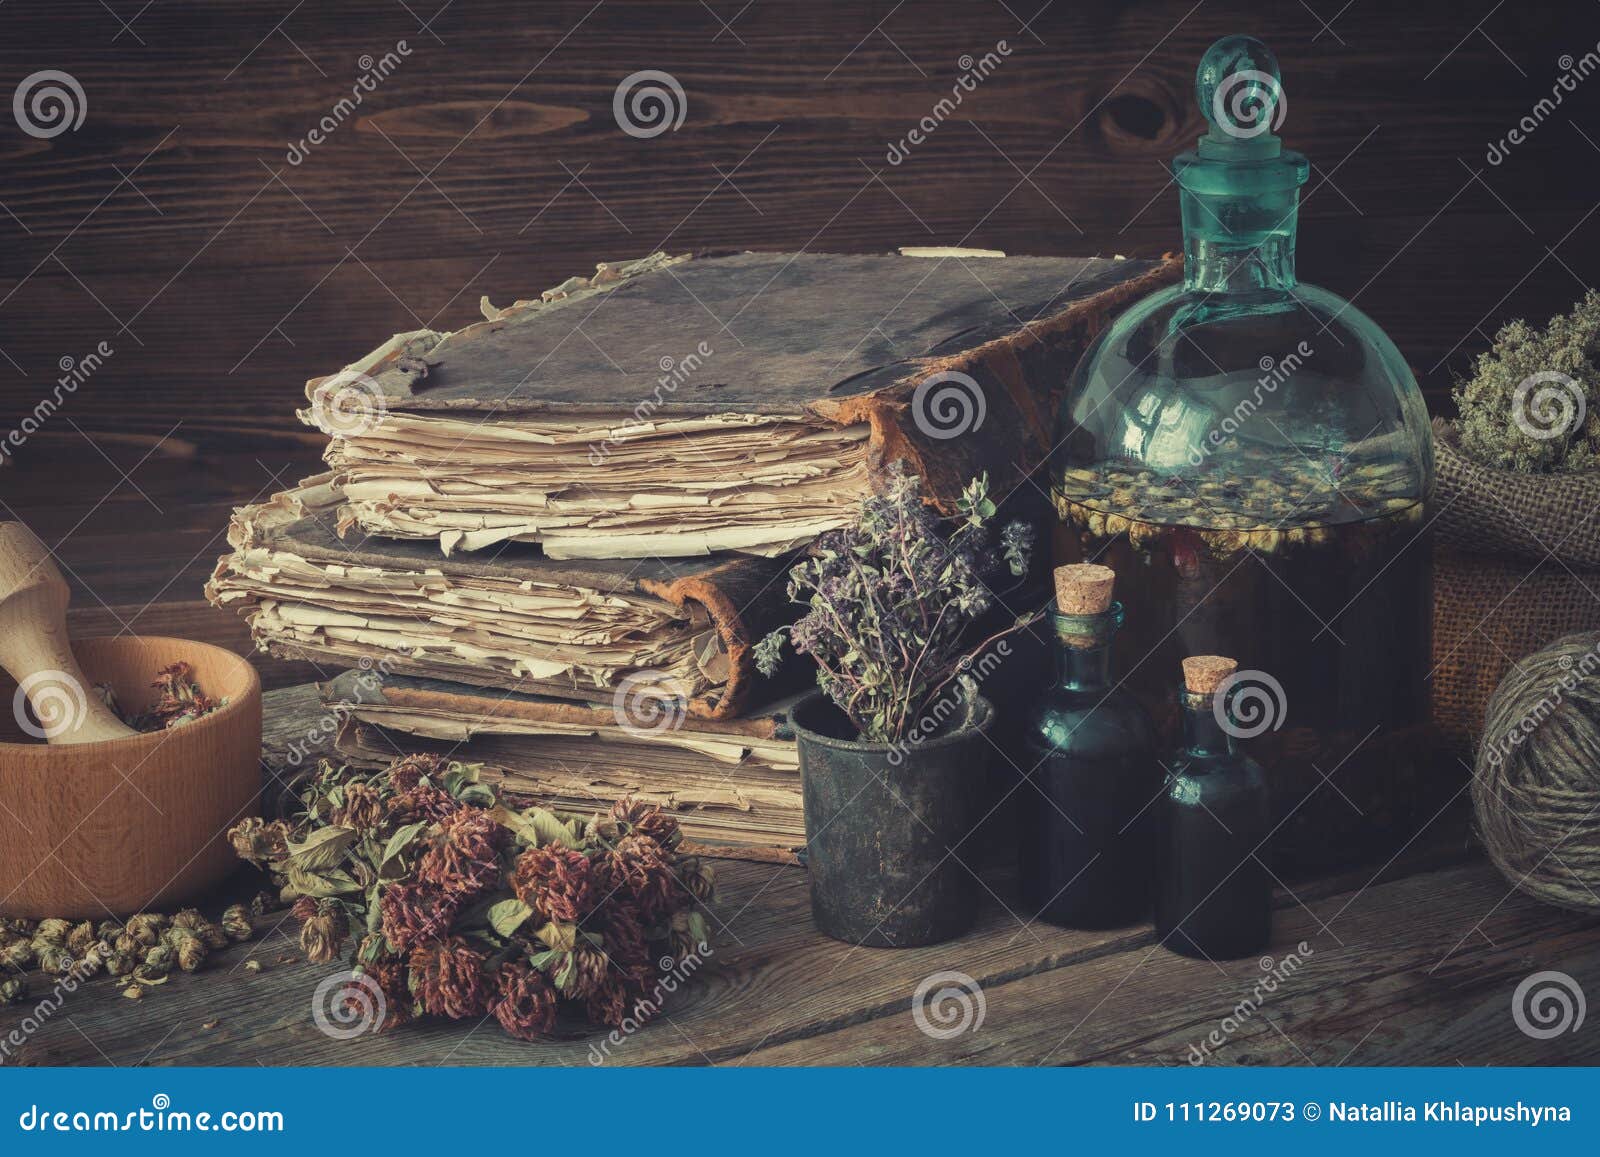 tincture bottles, assortment of dried healthy herbs, old books, wooden mortar, sack of medicinal herbs. herbal medicine.